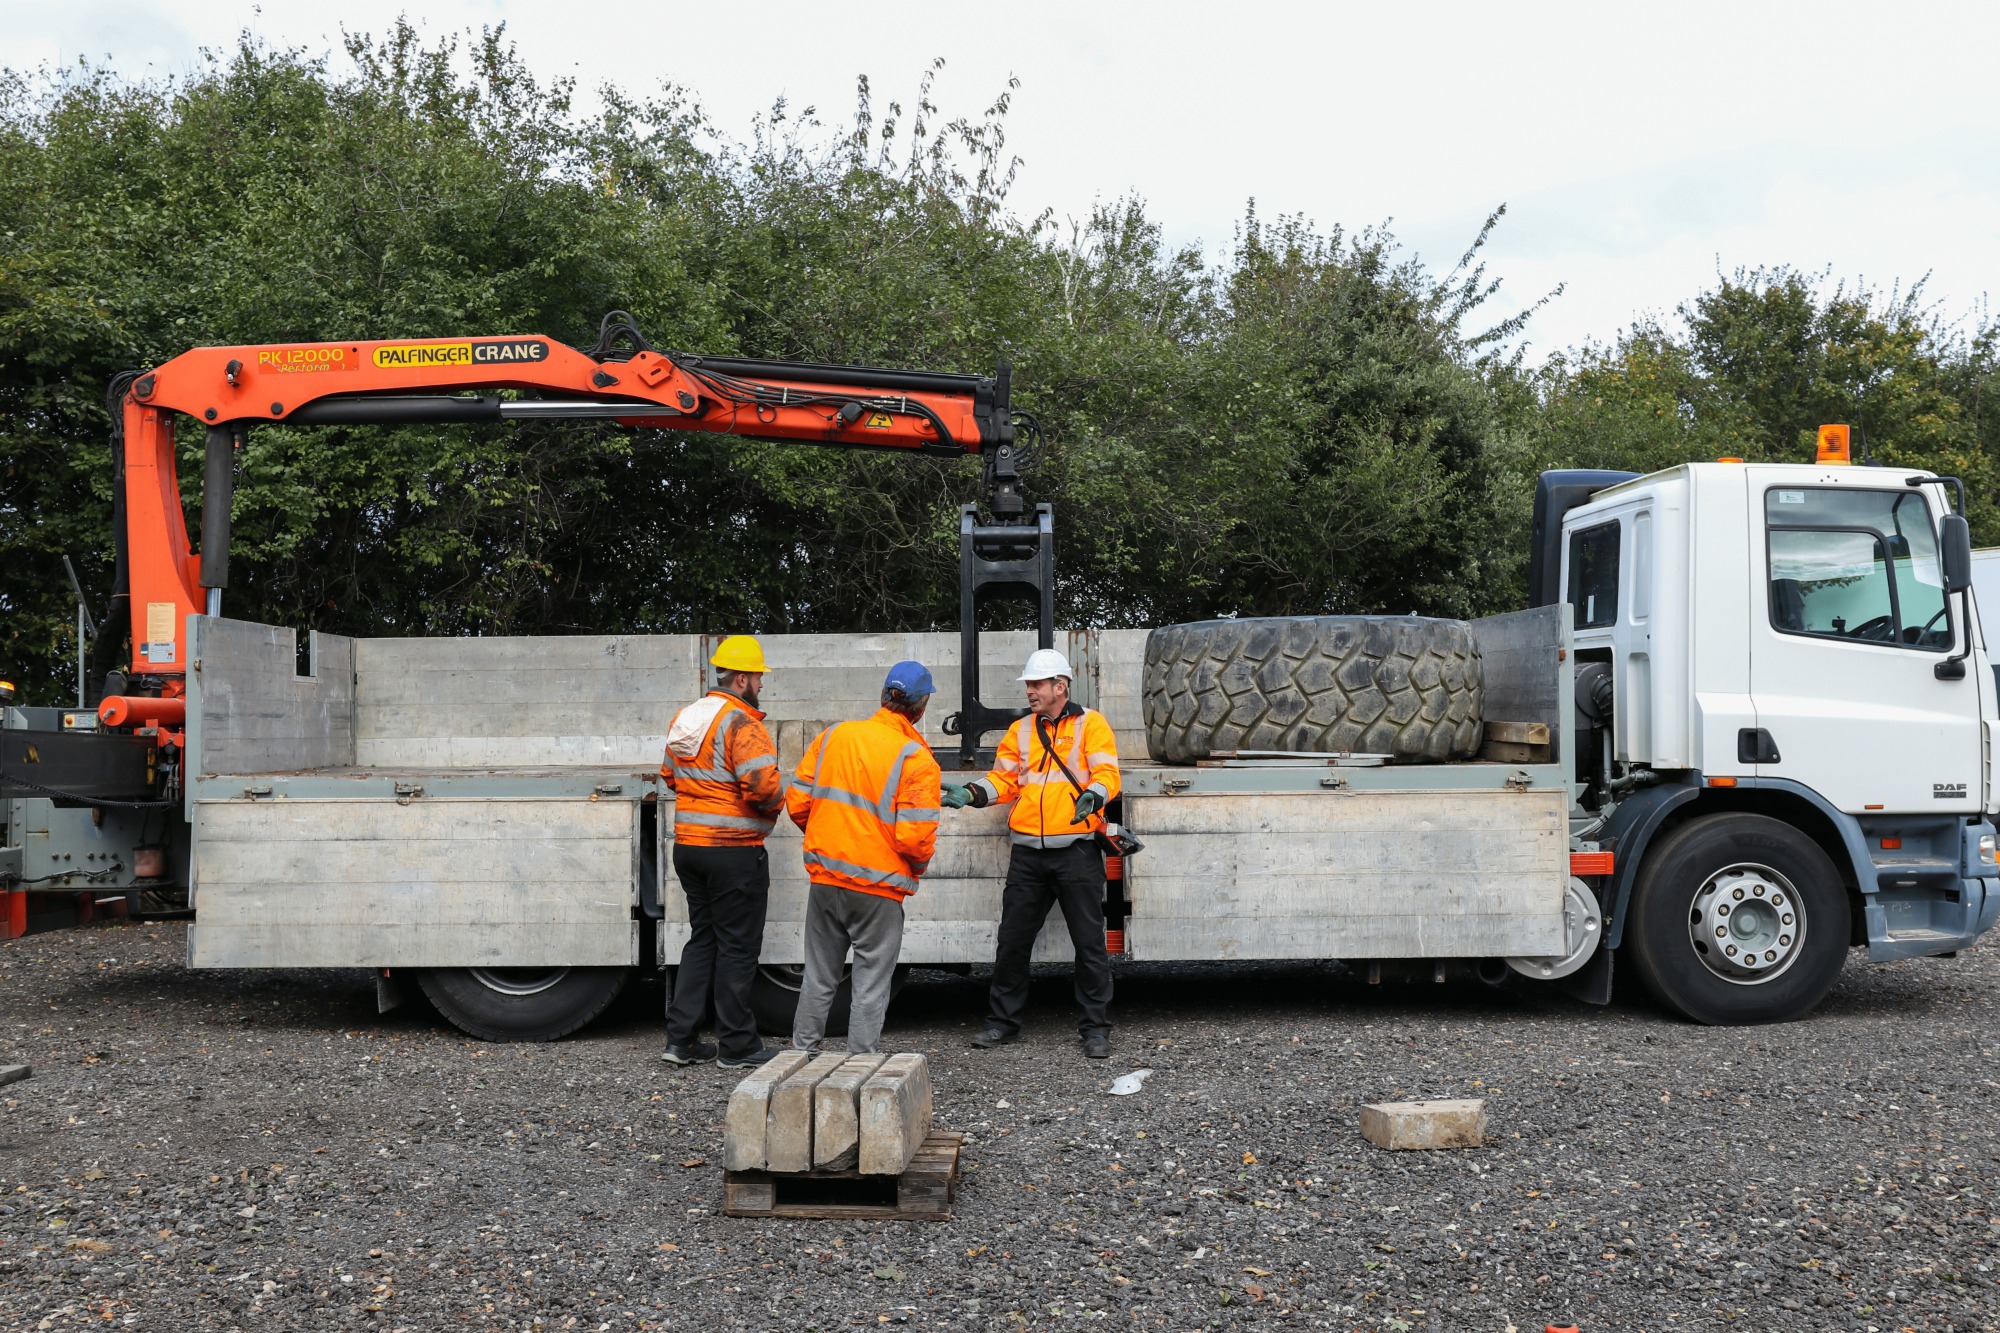 ALLMI Lorry Loader training course